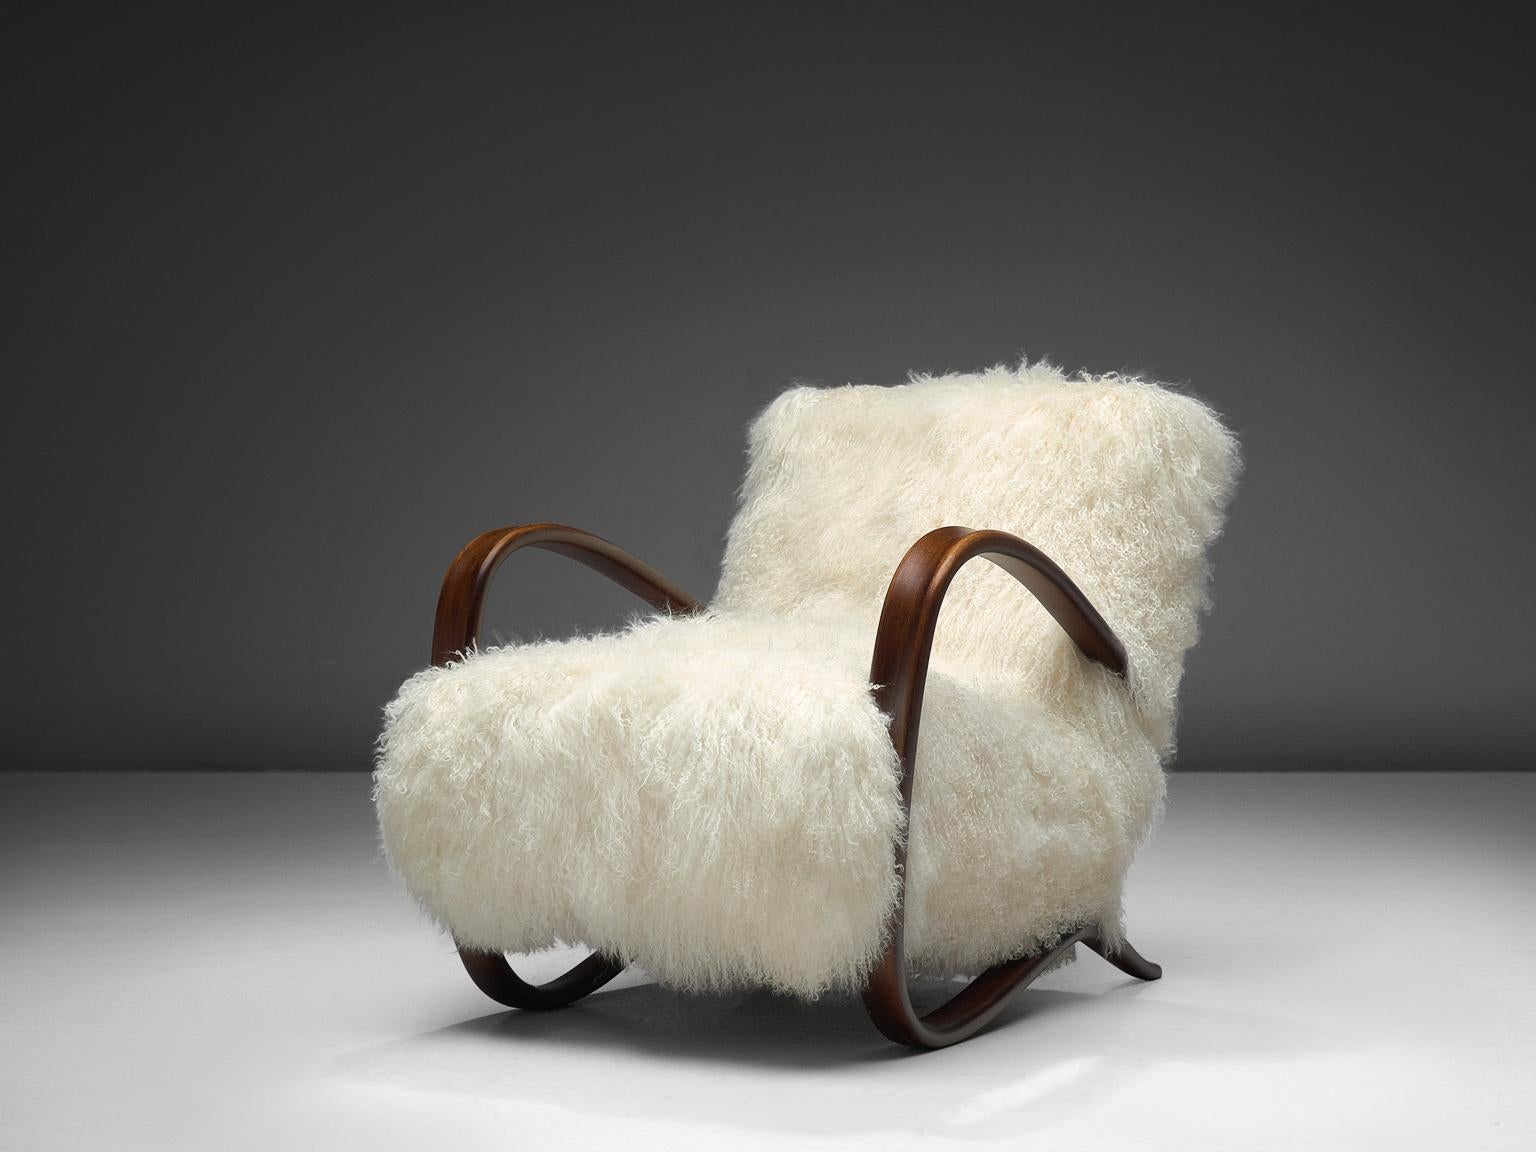 Jindrich Halabala, lounge chair, model 'H269', stained beech, Tibetan lambswool, Czech Republic, 1930s.

Extraordinary easy chair in white Tibetan lambswool upholstery. This design has a very dynamic and abundant appearance and the fuzzy upholstery